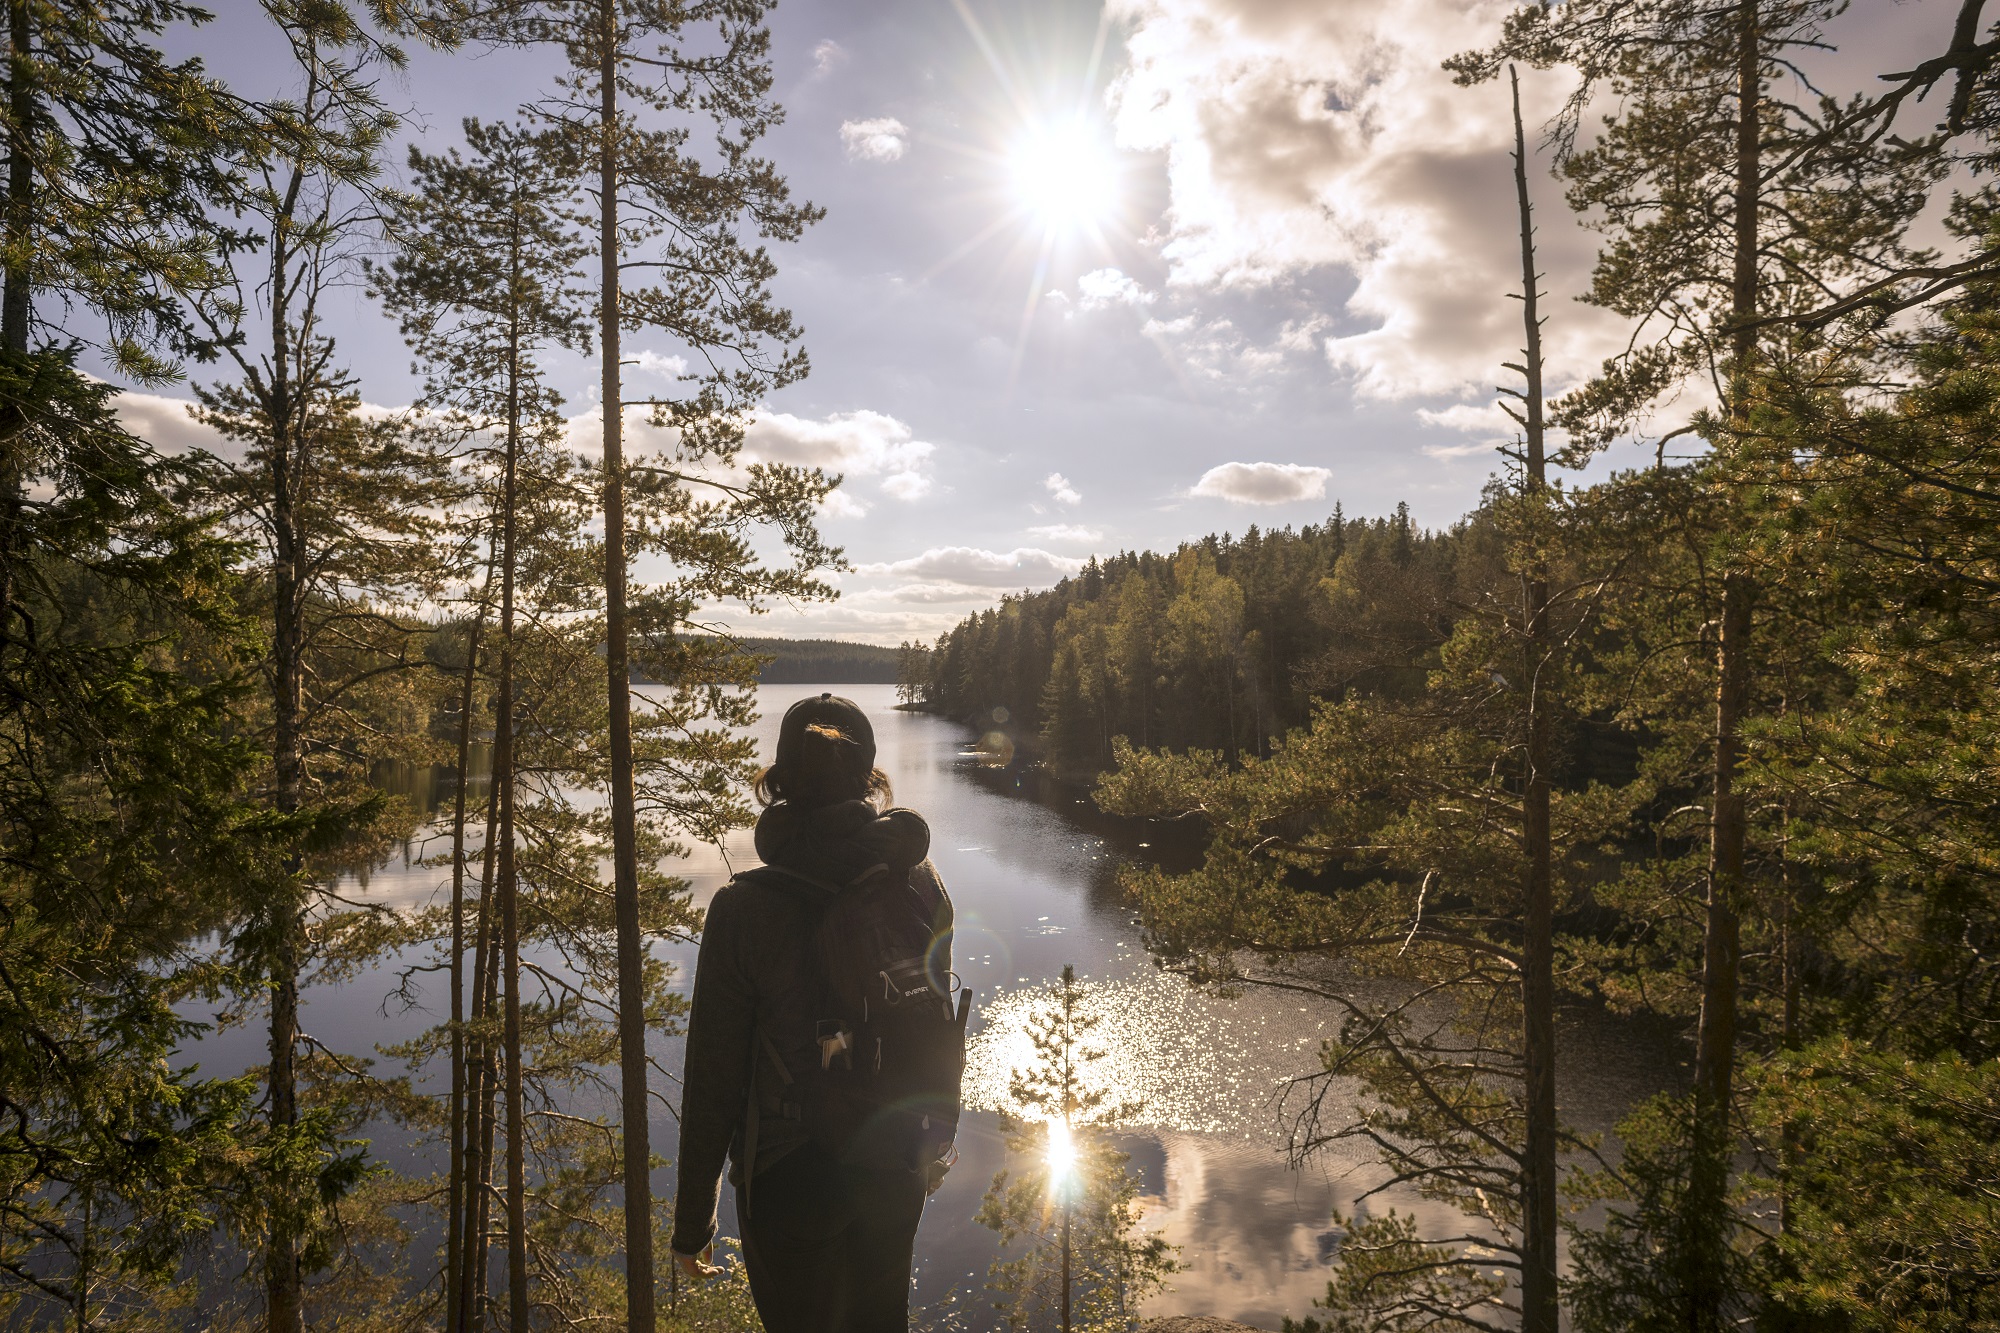 A hiker in a forest, looking at the lake in front of her.